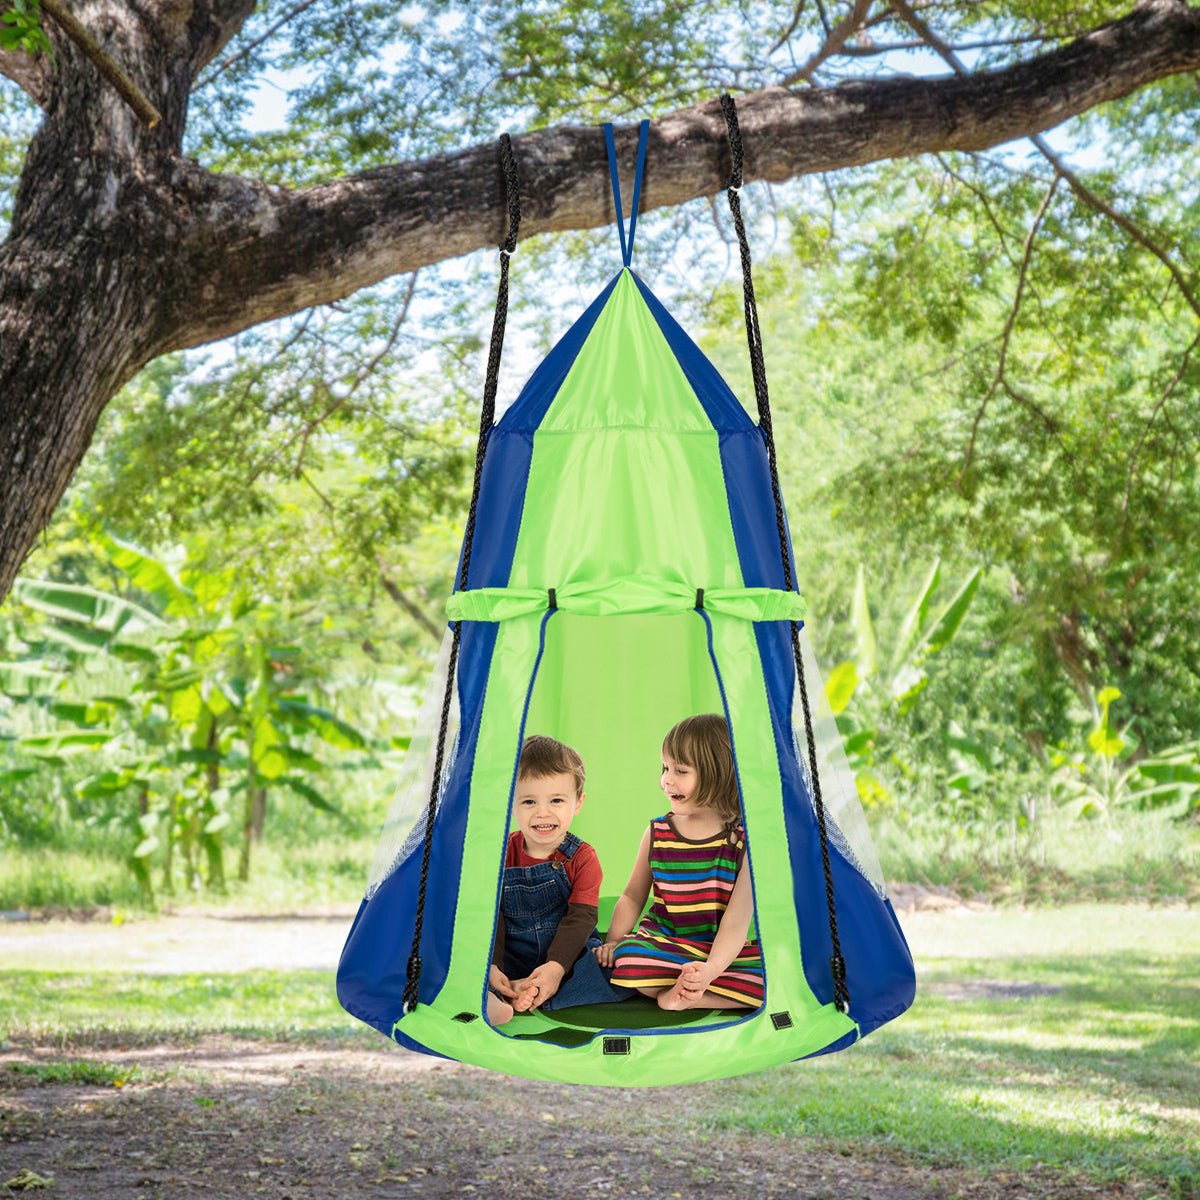 2 in 1 Tree Tent Swing Set: The Ultimate Adventure in the Trees!